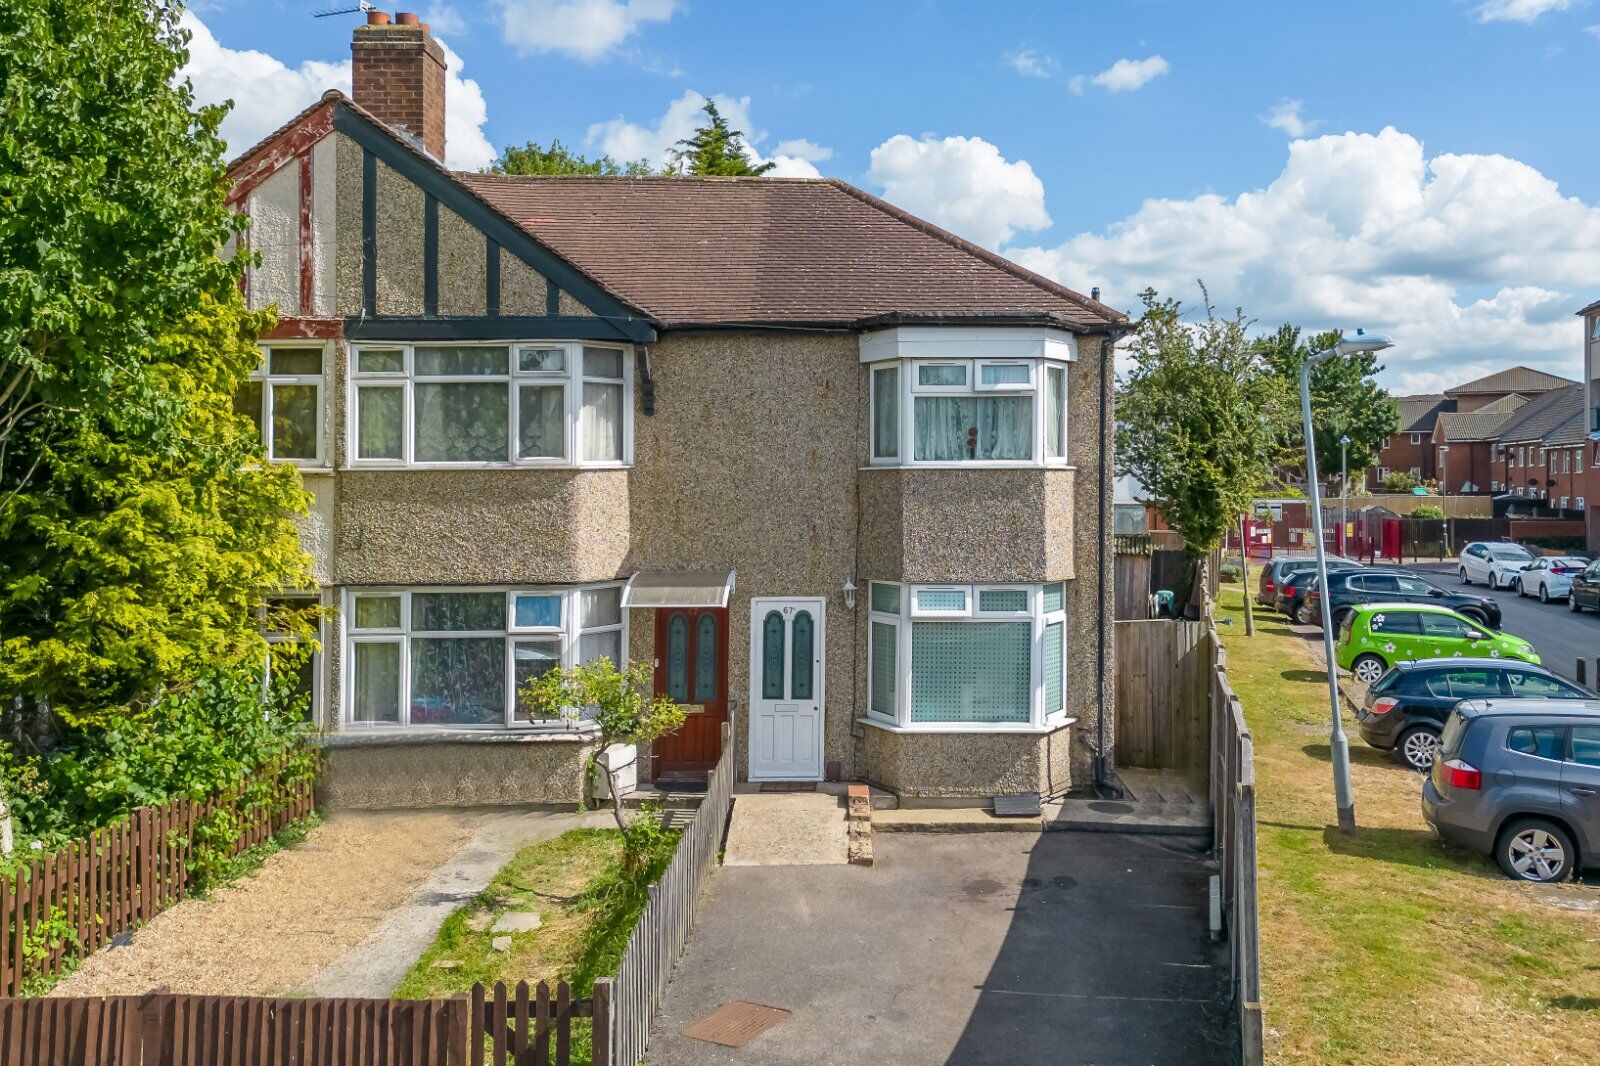 3 bedroom end terraced house for sale Haslemere Avenue, Mitcham, CR4, main image